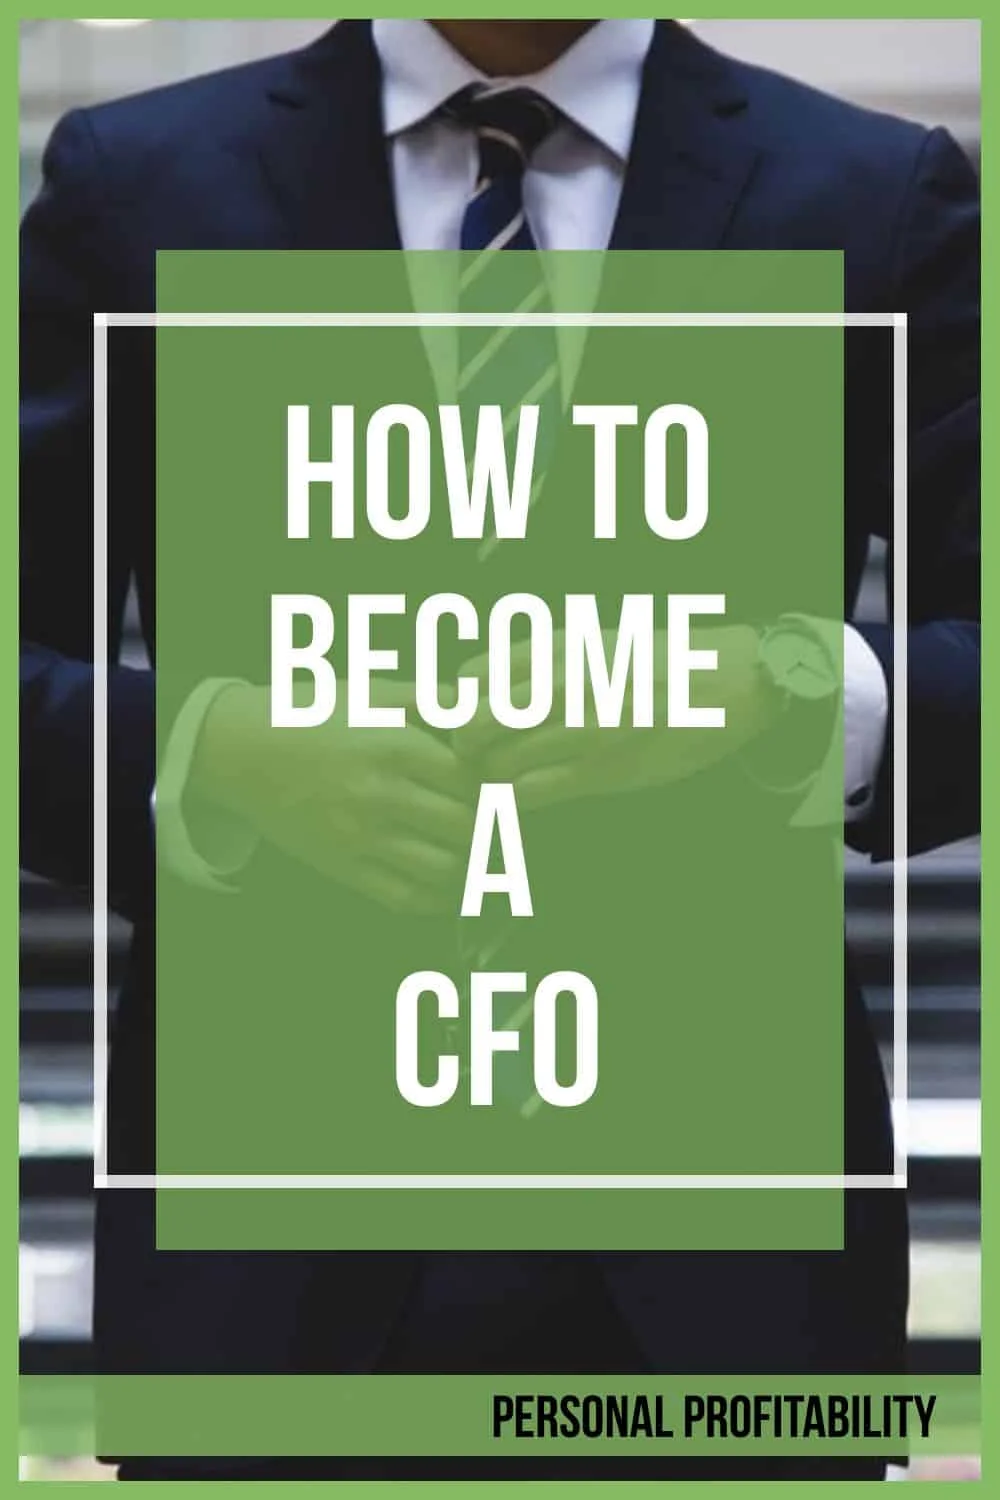 How To Become a CFO